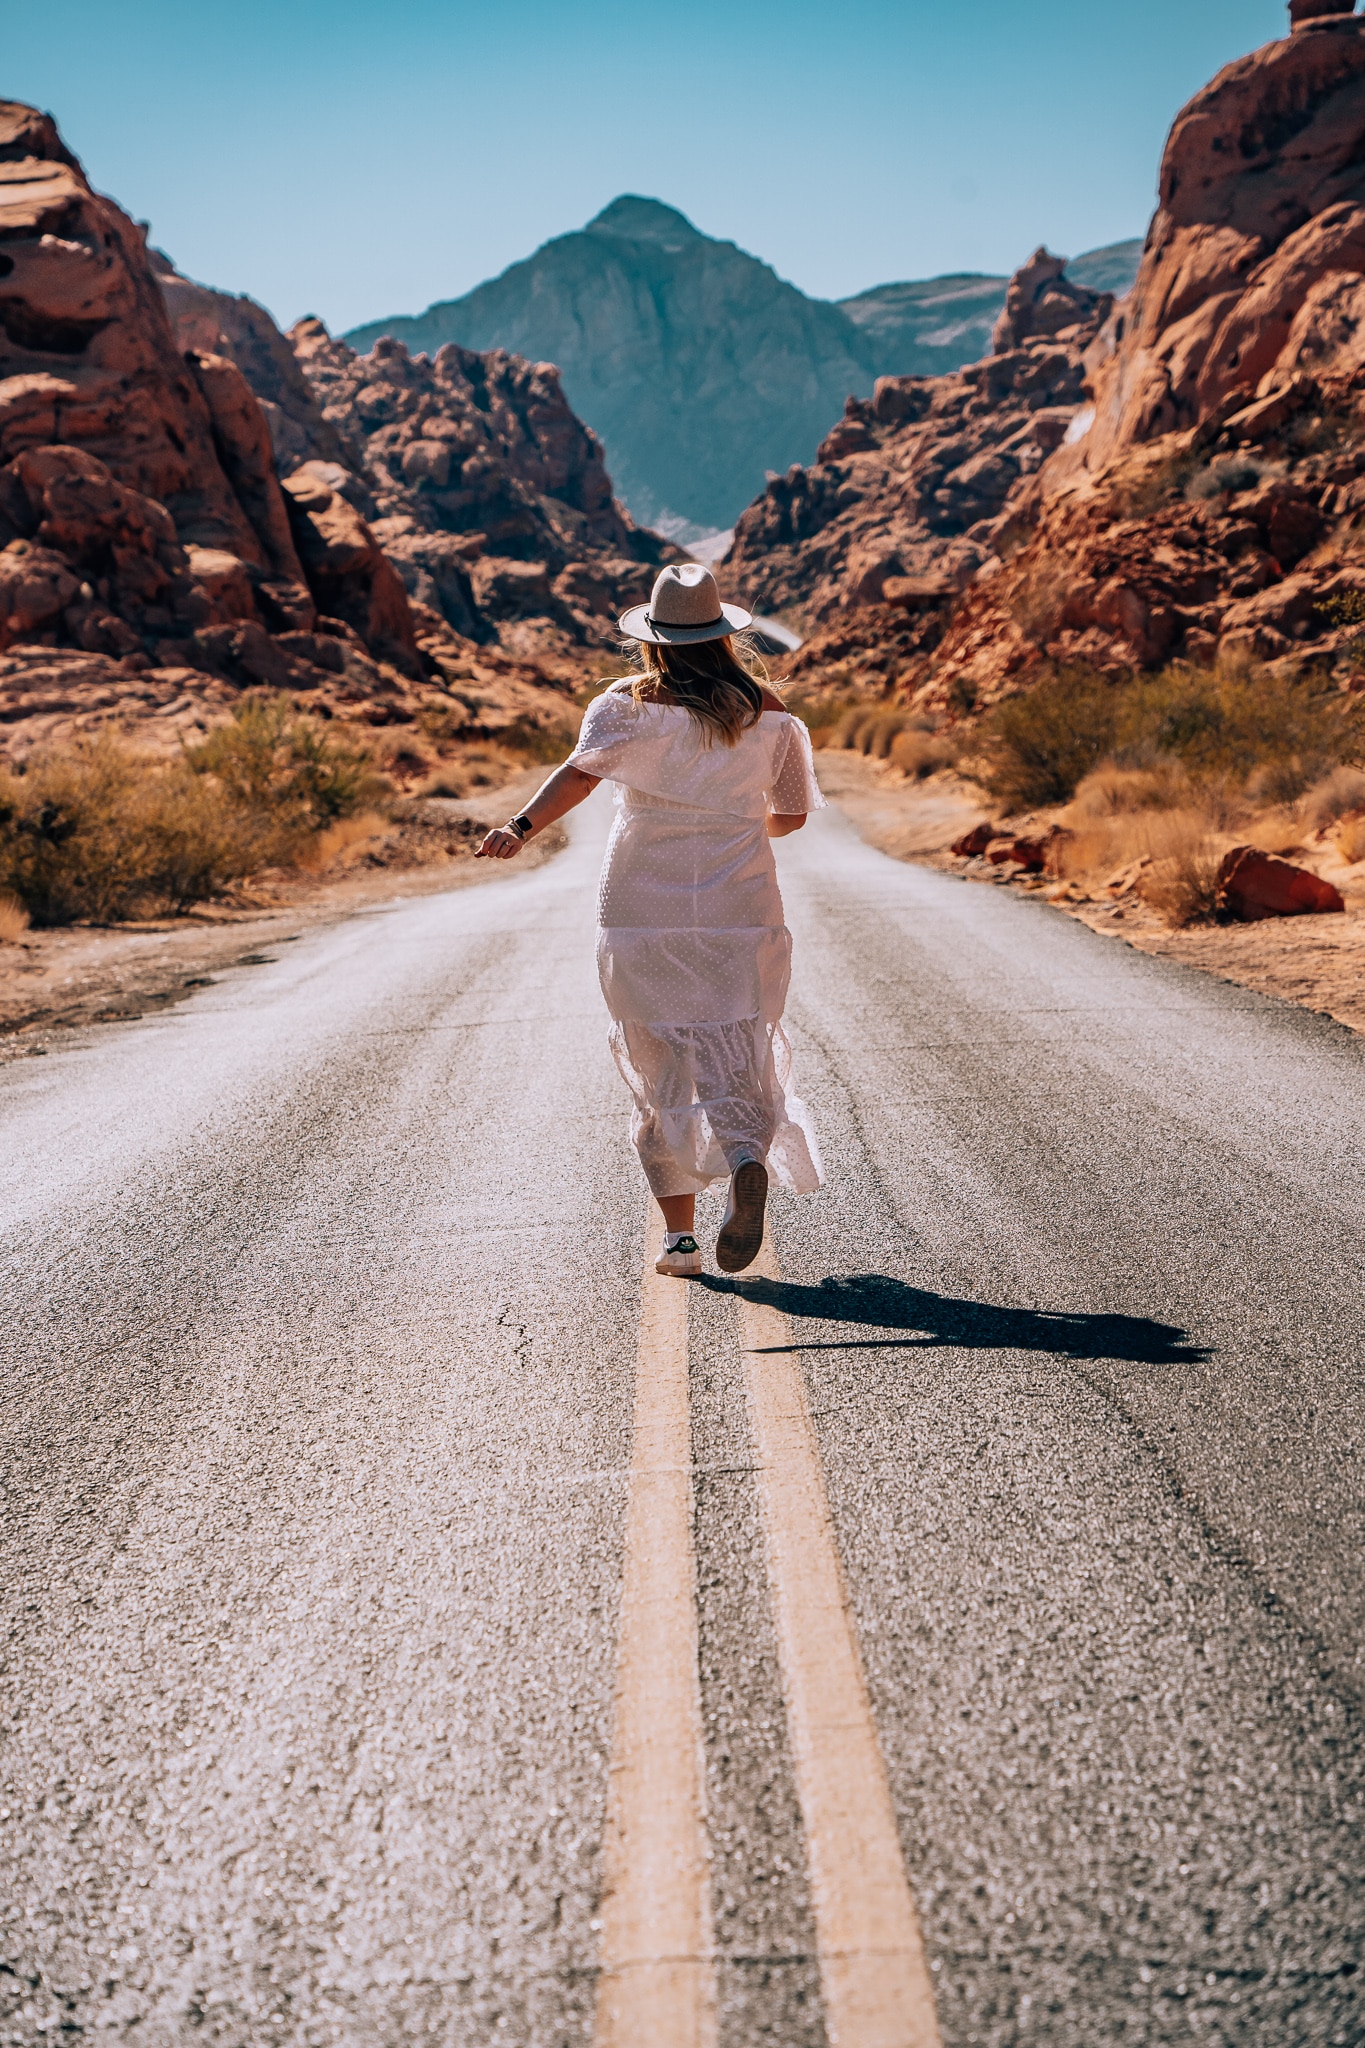 Woman running away in the middle of a road with red rocks all around